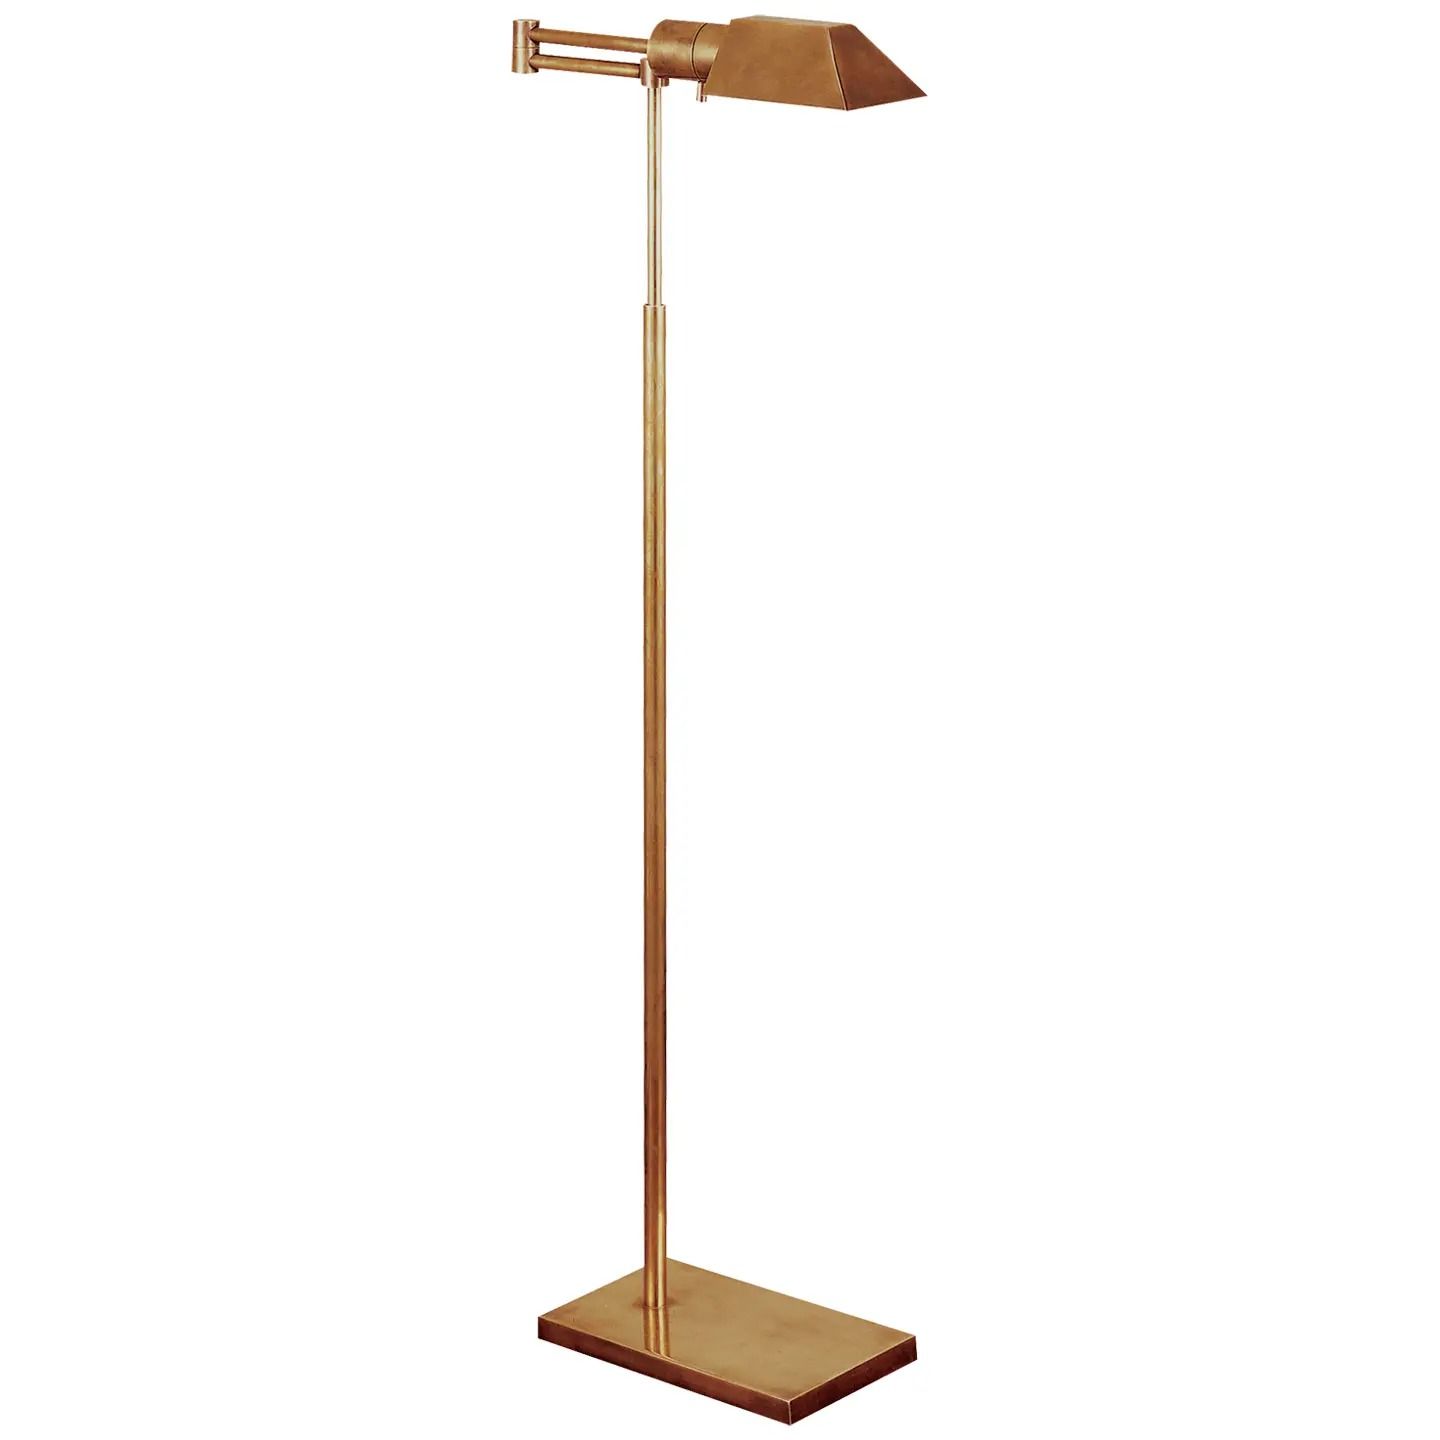 Adding Timeless Elegance to Your Home with an Antique Brass Swing Arm Floor Lamp